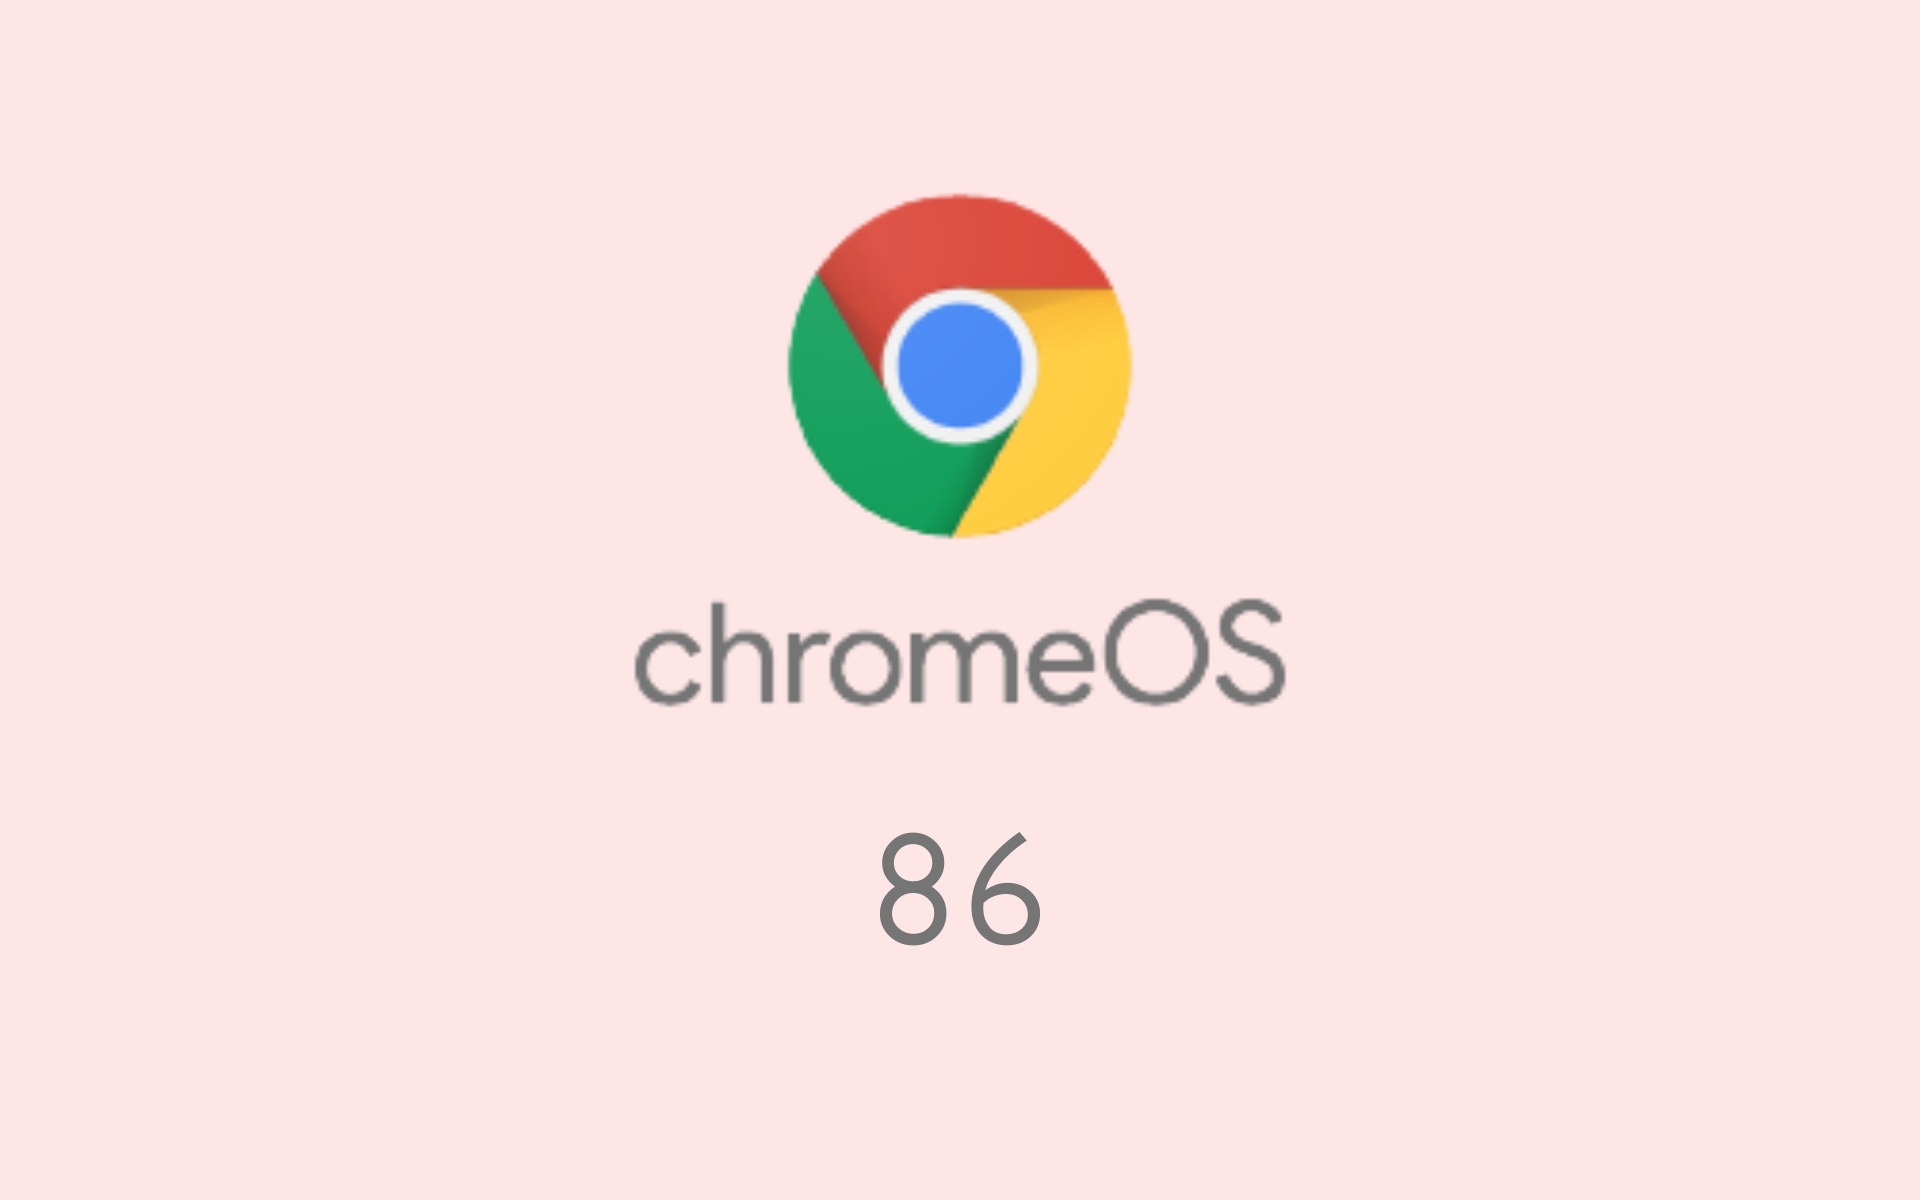 Chrome OS 86 Rolls Out with Linux Support for Debian GNU/Linux 10 “Buster”